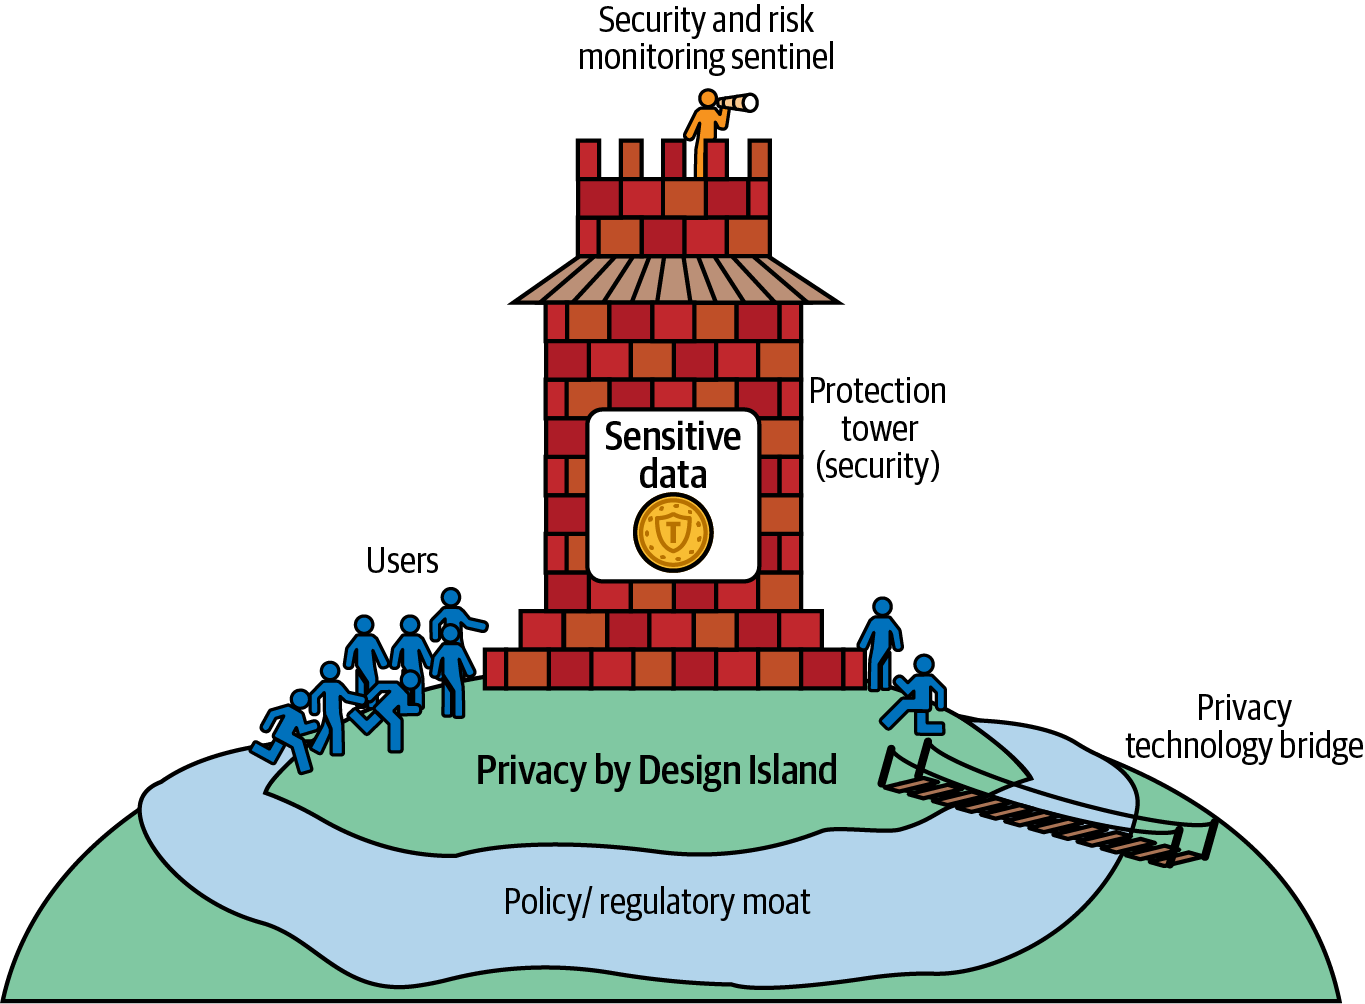 A map of the data governance landscape inside an organization. There is a tower in the center with a treasure inside it. The treasure is the sensitive data. The tower says protection and security on it. At the top of the tower there is a sentinel that is names security risk and monitoring. The tower is on an island called privacy by design island. There are people on the island who are users and others who are data stakeholders. There is a moat around the island called the policy and regulatory moat. There is a bridge connecting the island to mainland that is called a privacy technology bridge.